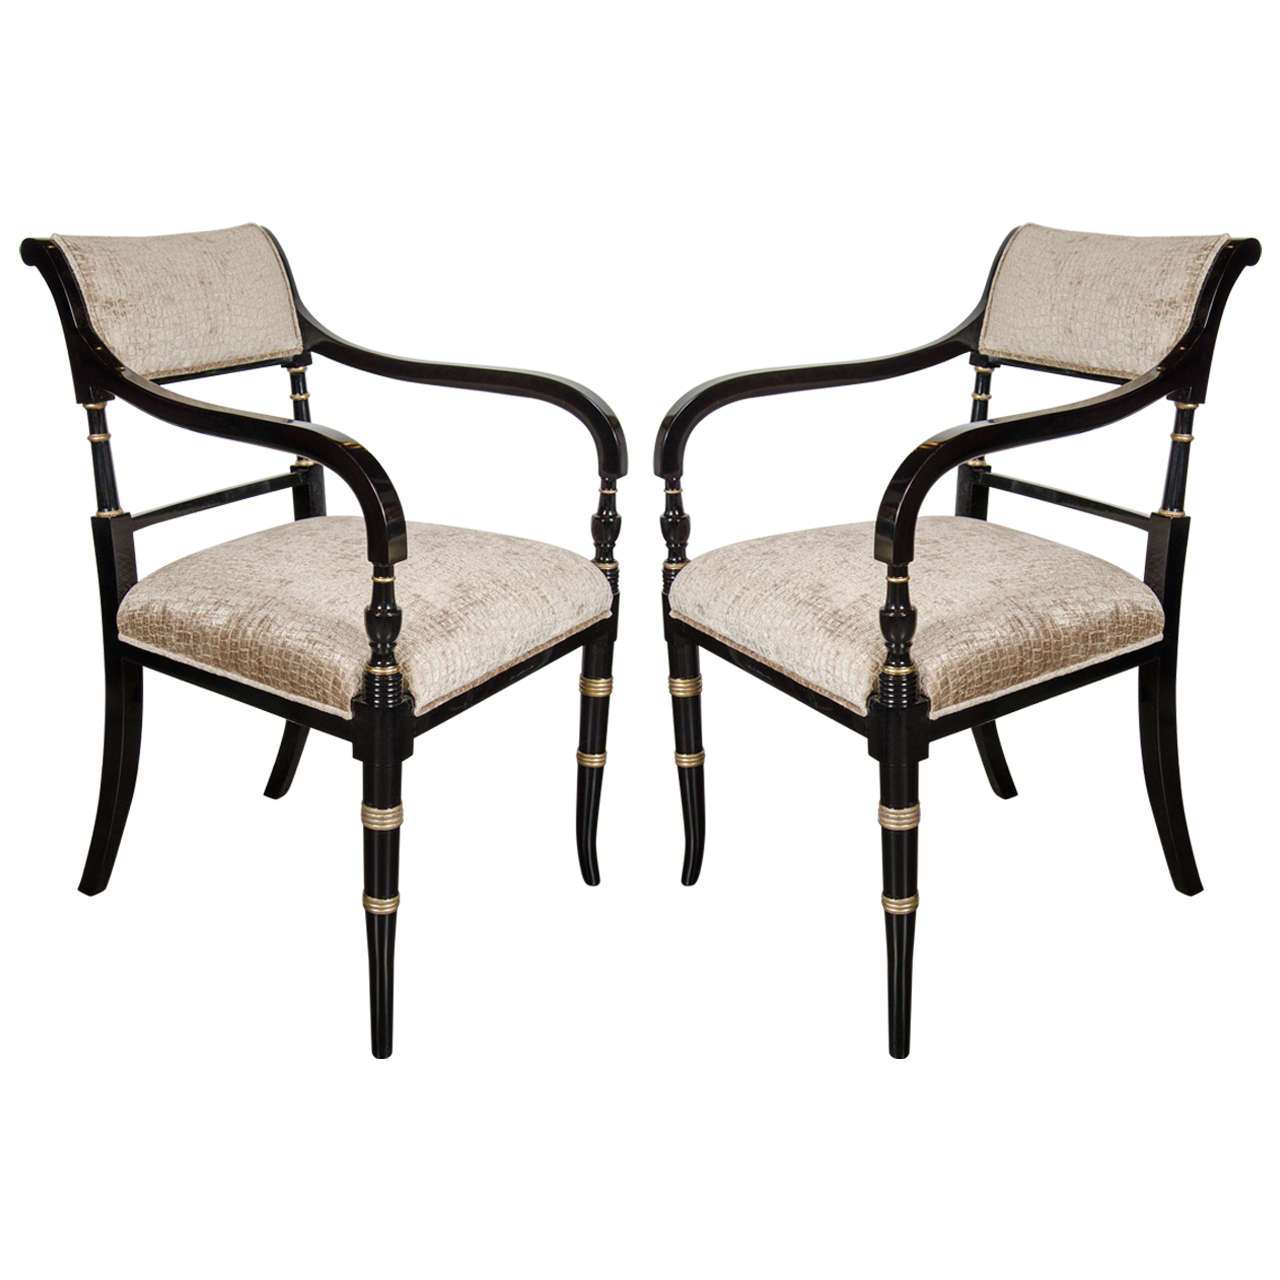 Elegant Pair of Mid-Century Modernist Neoclassical Scroll Arm Chairs